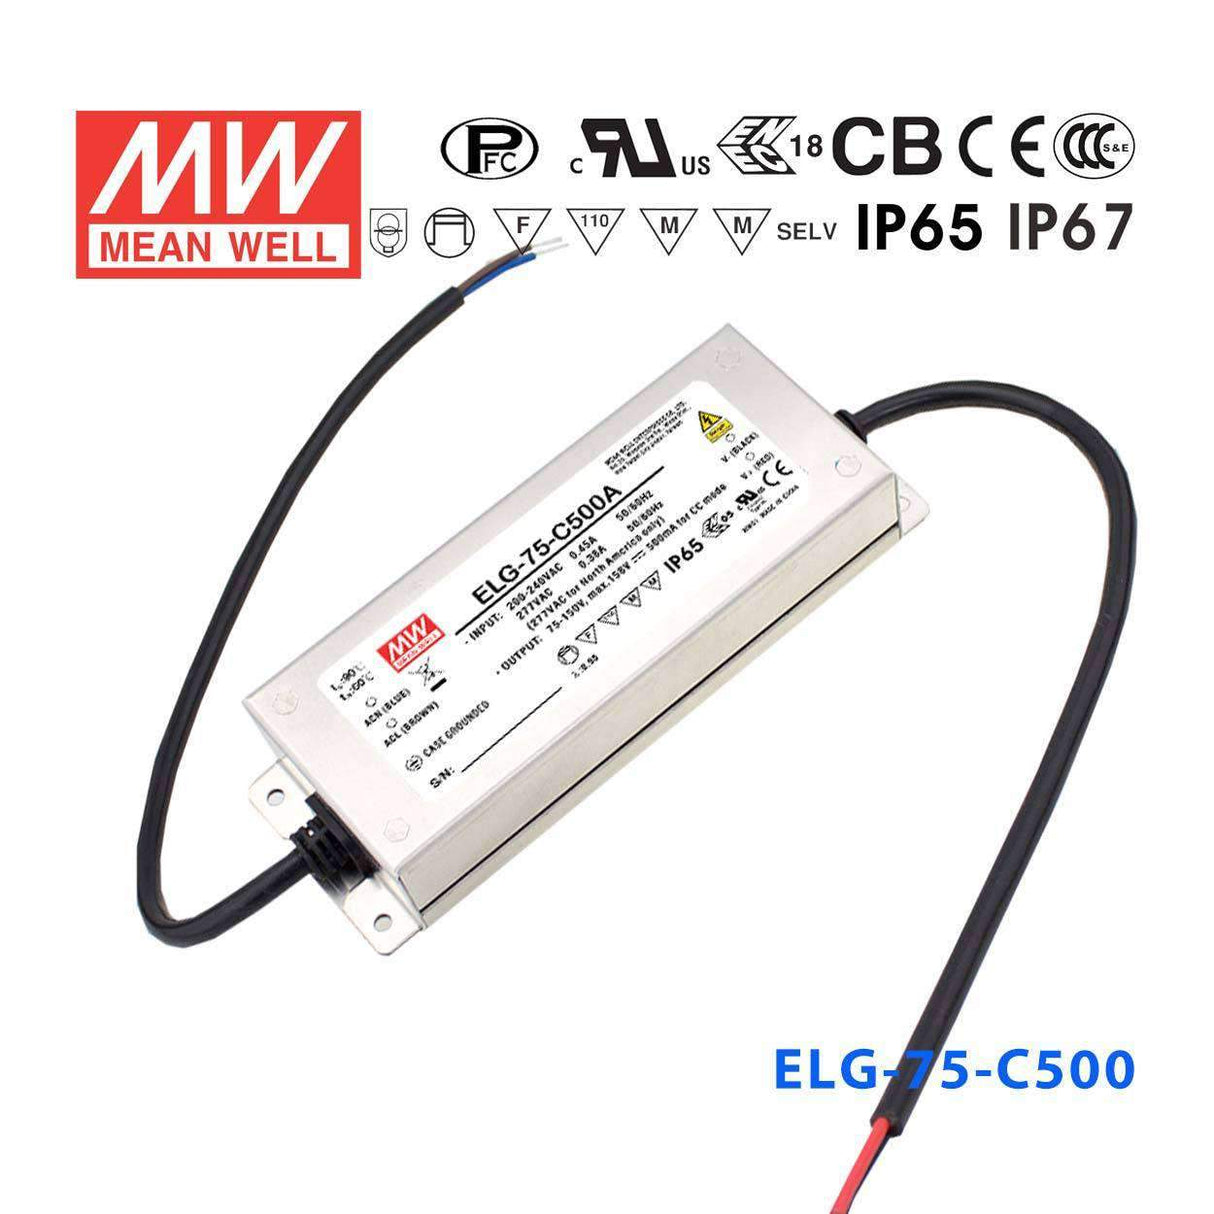 Mean Well ELG-75-C500D2 AC-DC Single output LED Driver Constant Current Mode with PFC